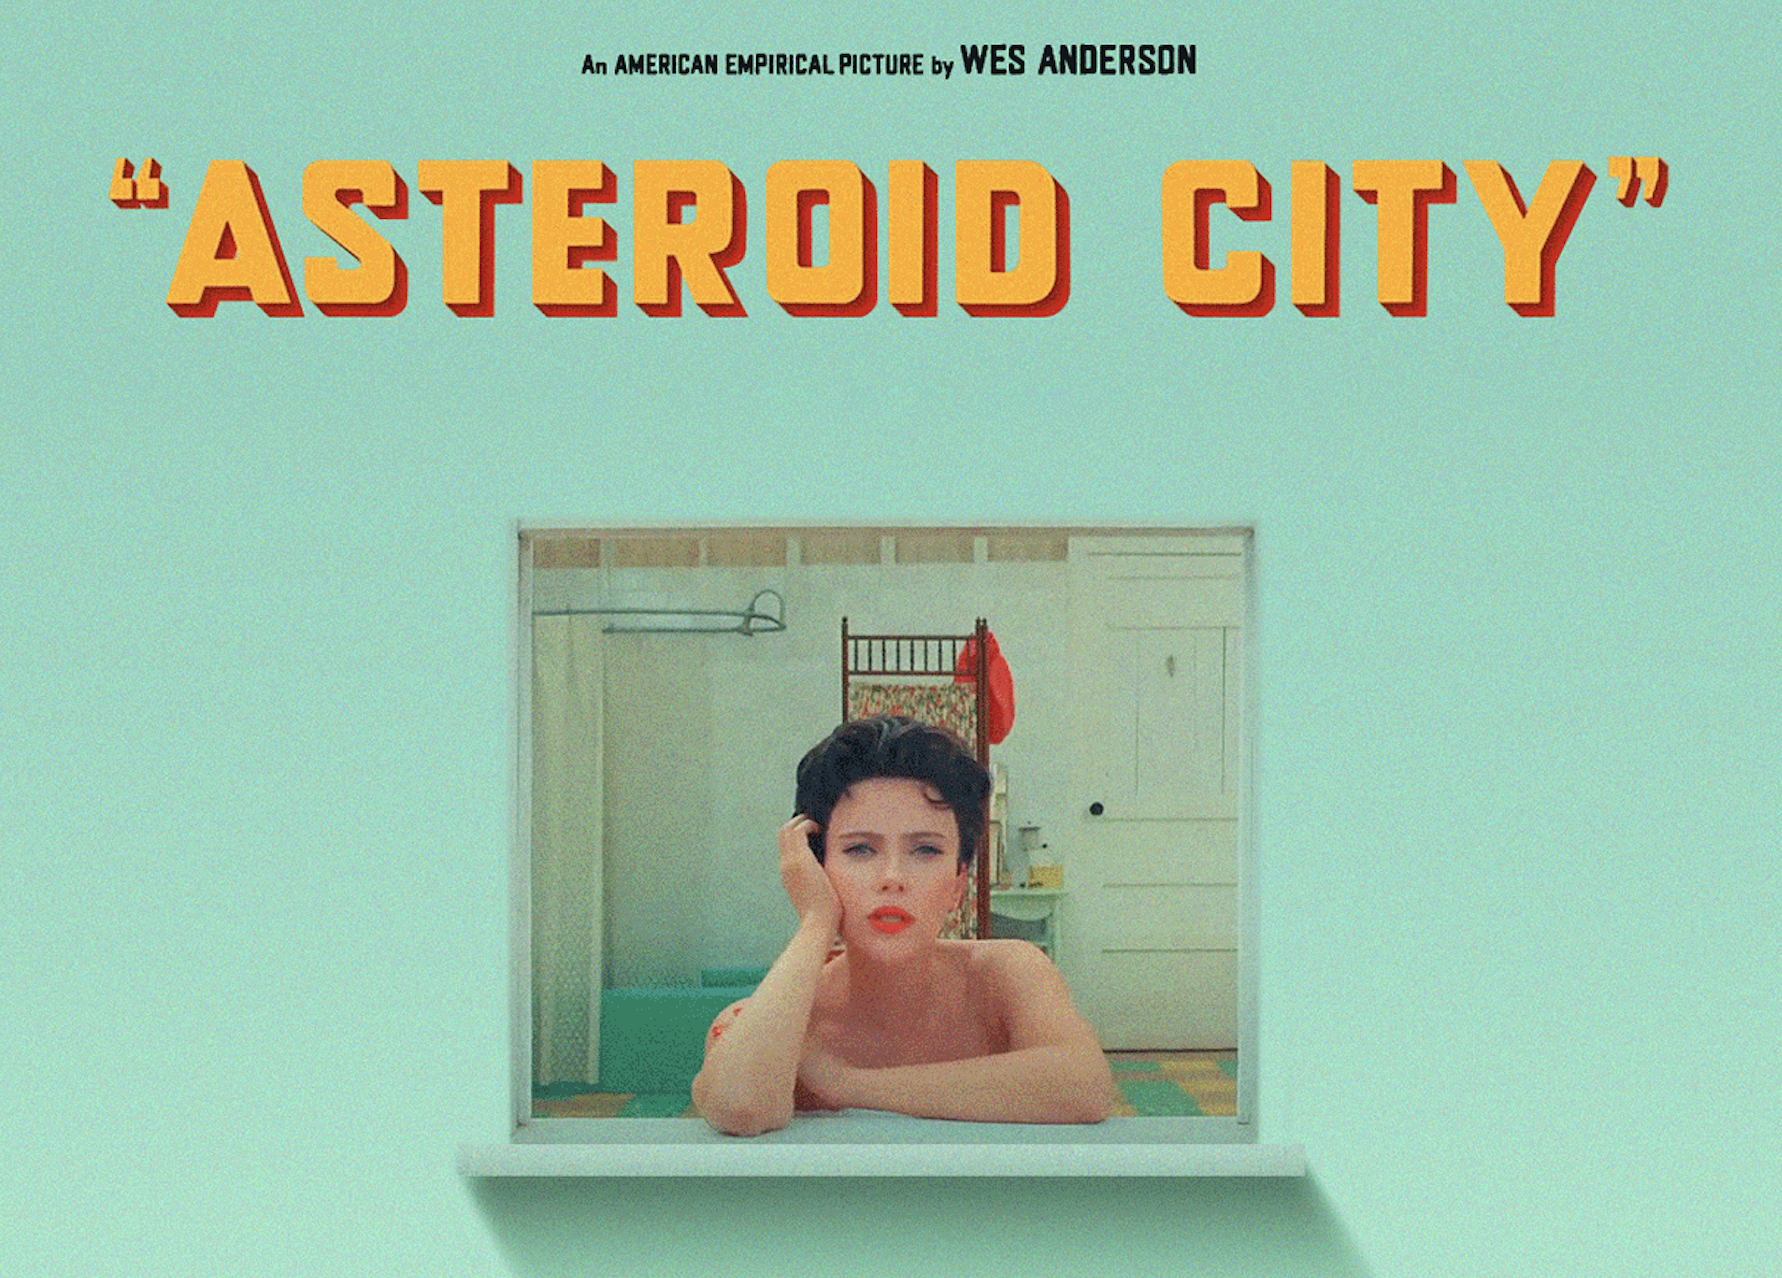 Asteroid City: A Wes Anderson Aesthetic Adventure